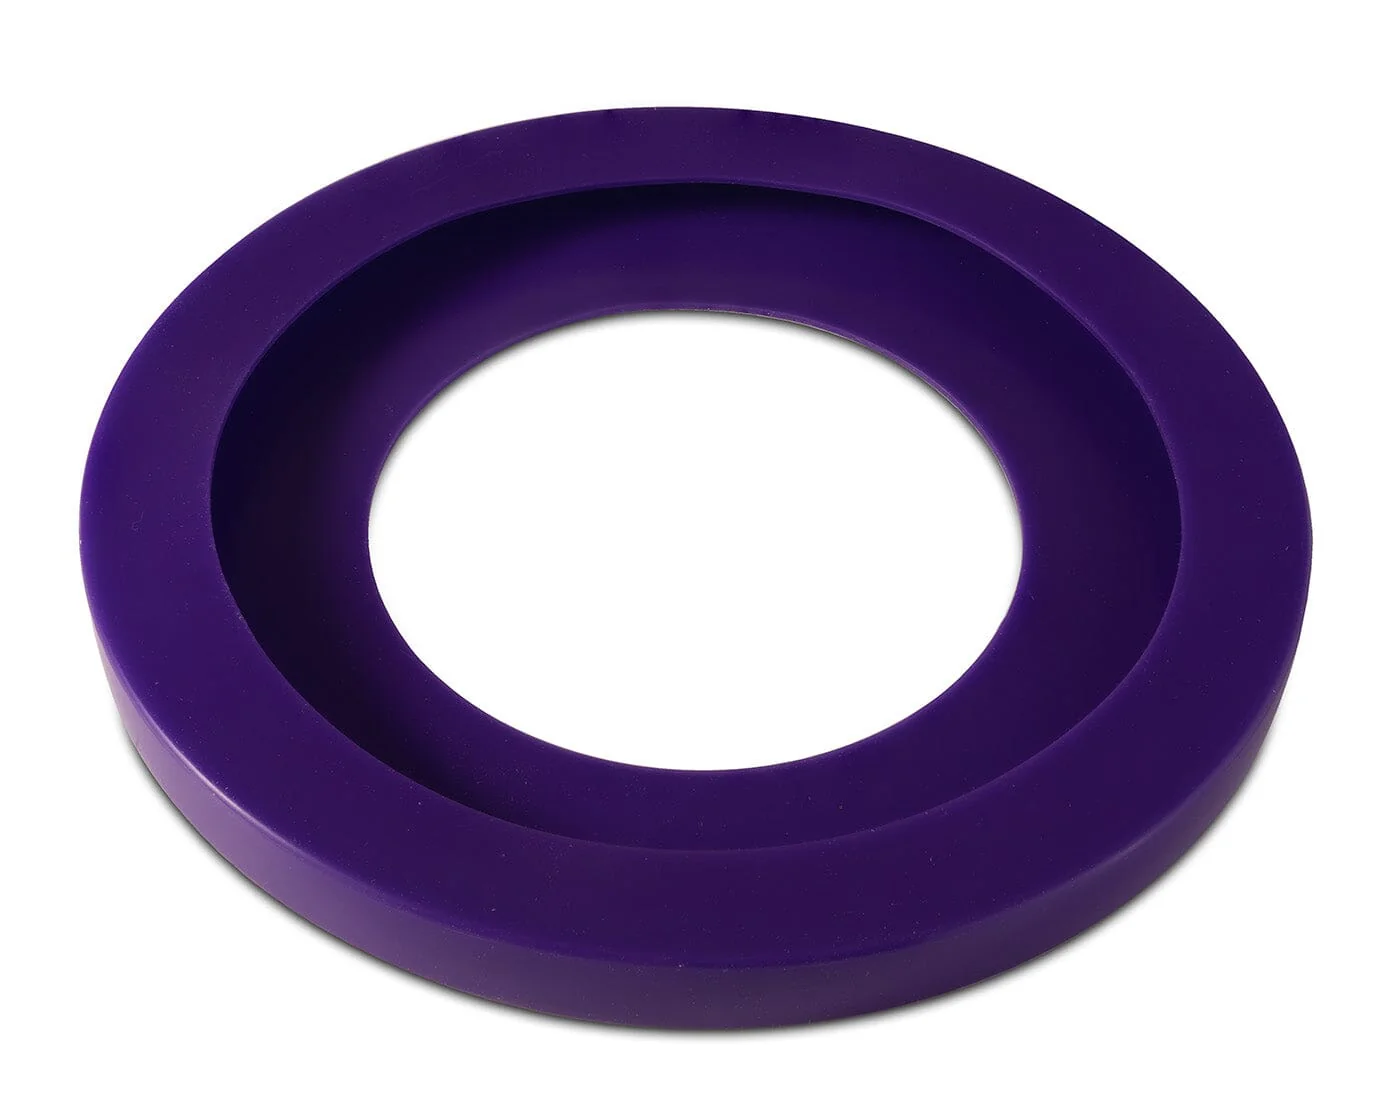 Will this gasket fit your 11.25 vacuum chamber lid?